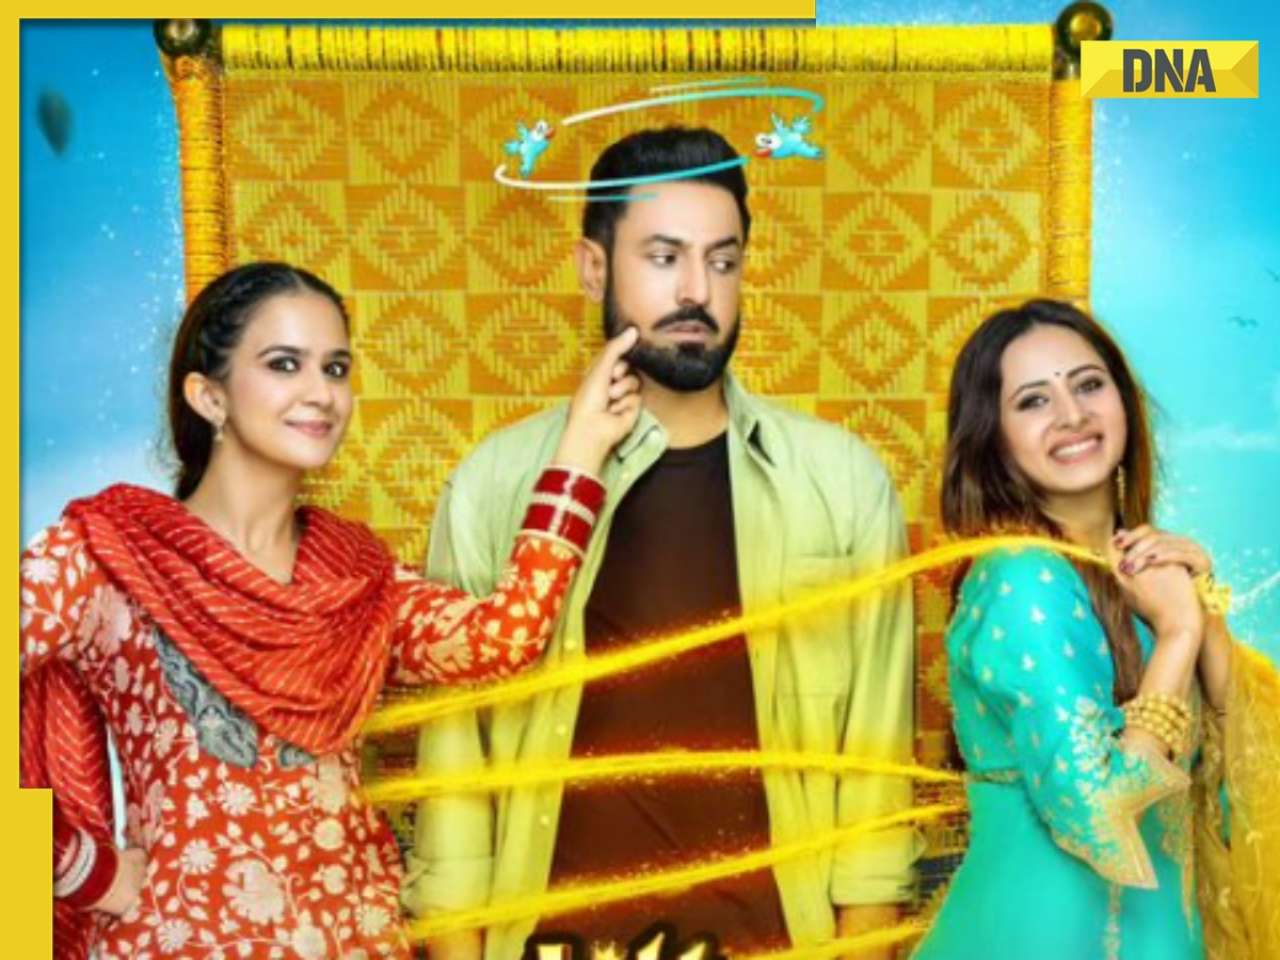 Jatt Nuu Chudail Takri box office collection: Gippy, Sargun-starrer starts well, earns Rs 10.79 crore in opening weekend